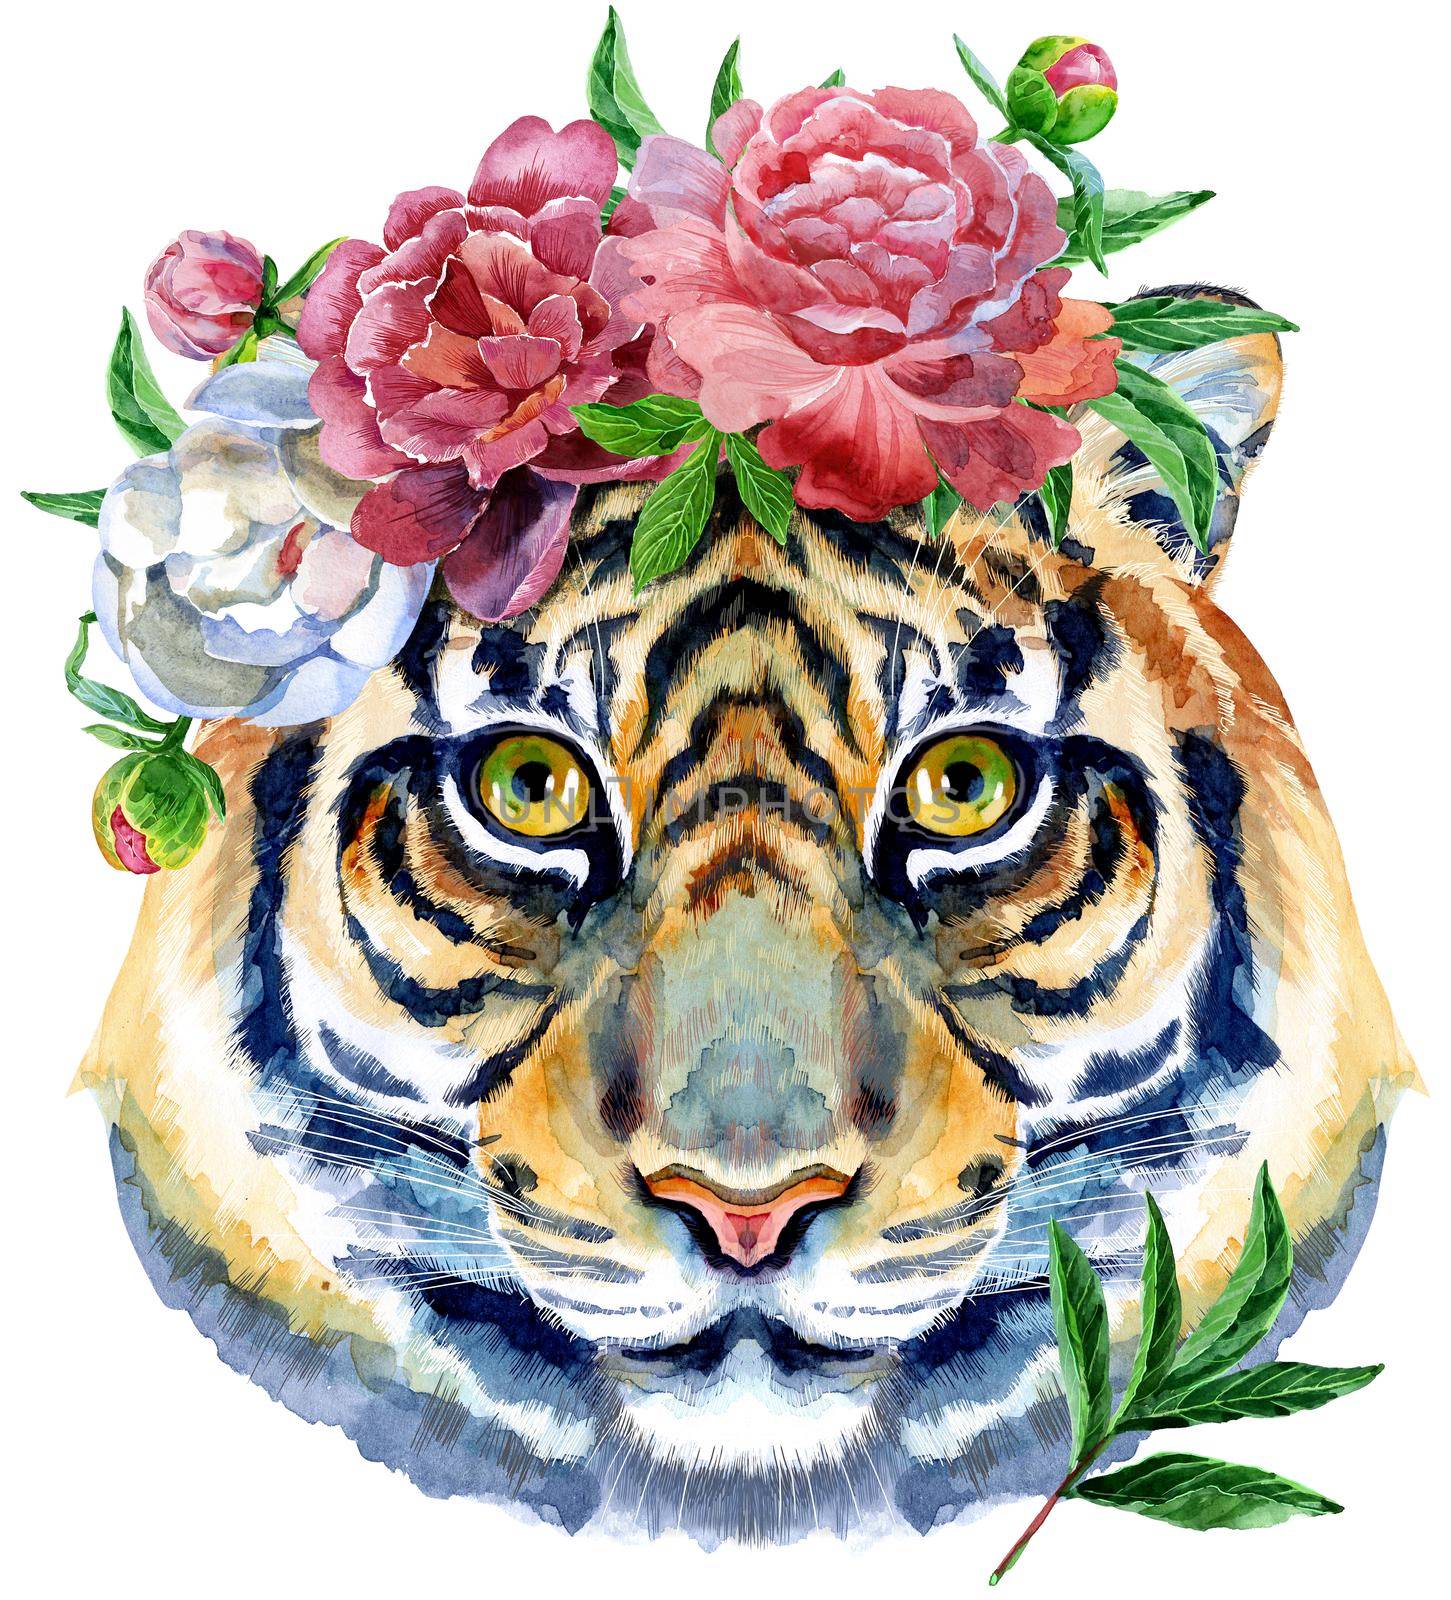 Tiger head horoscope character with flowers isolated on white background.